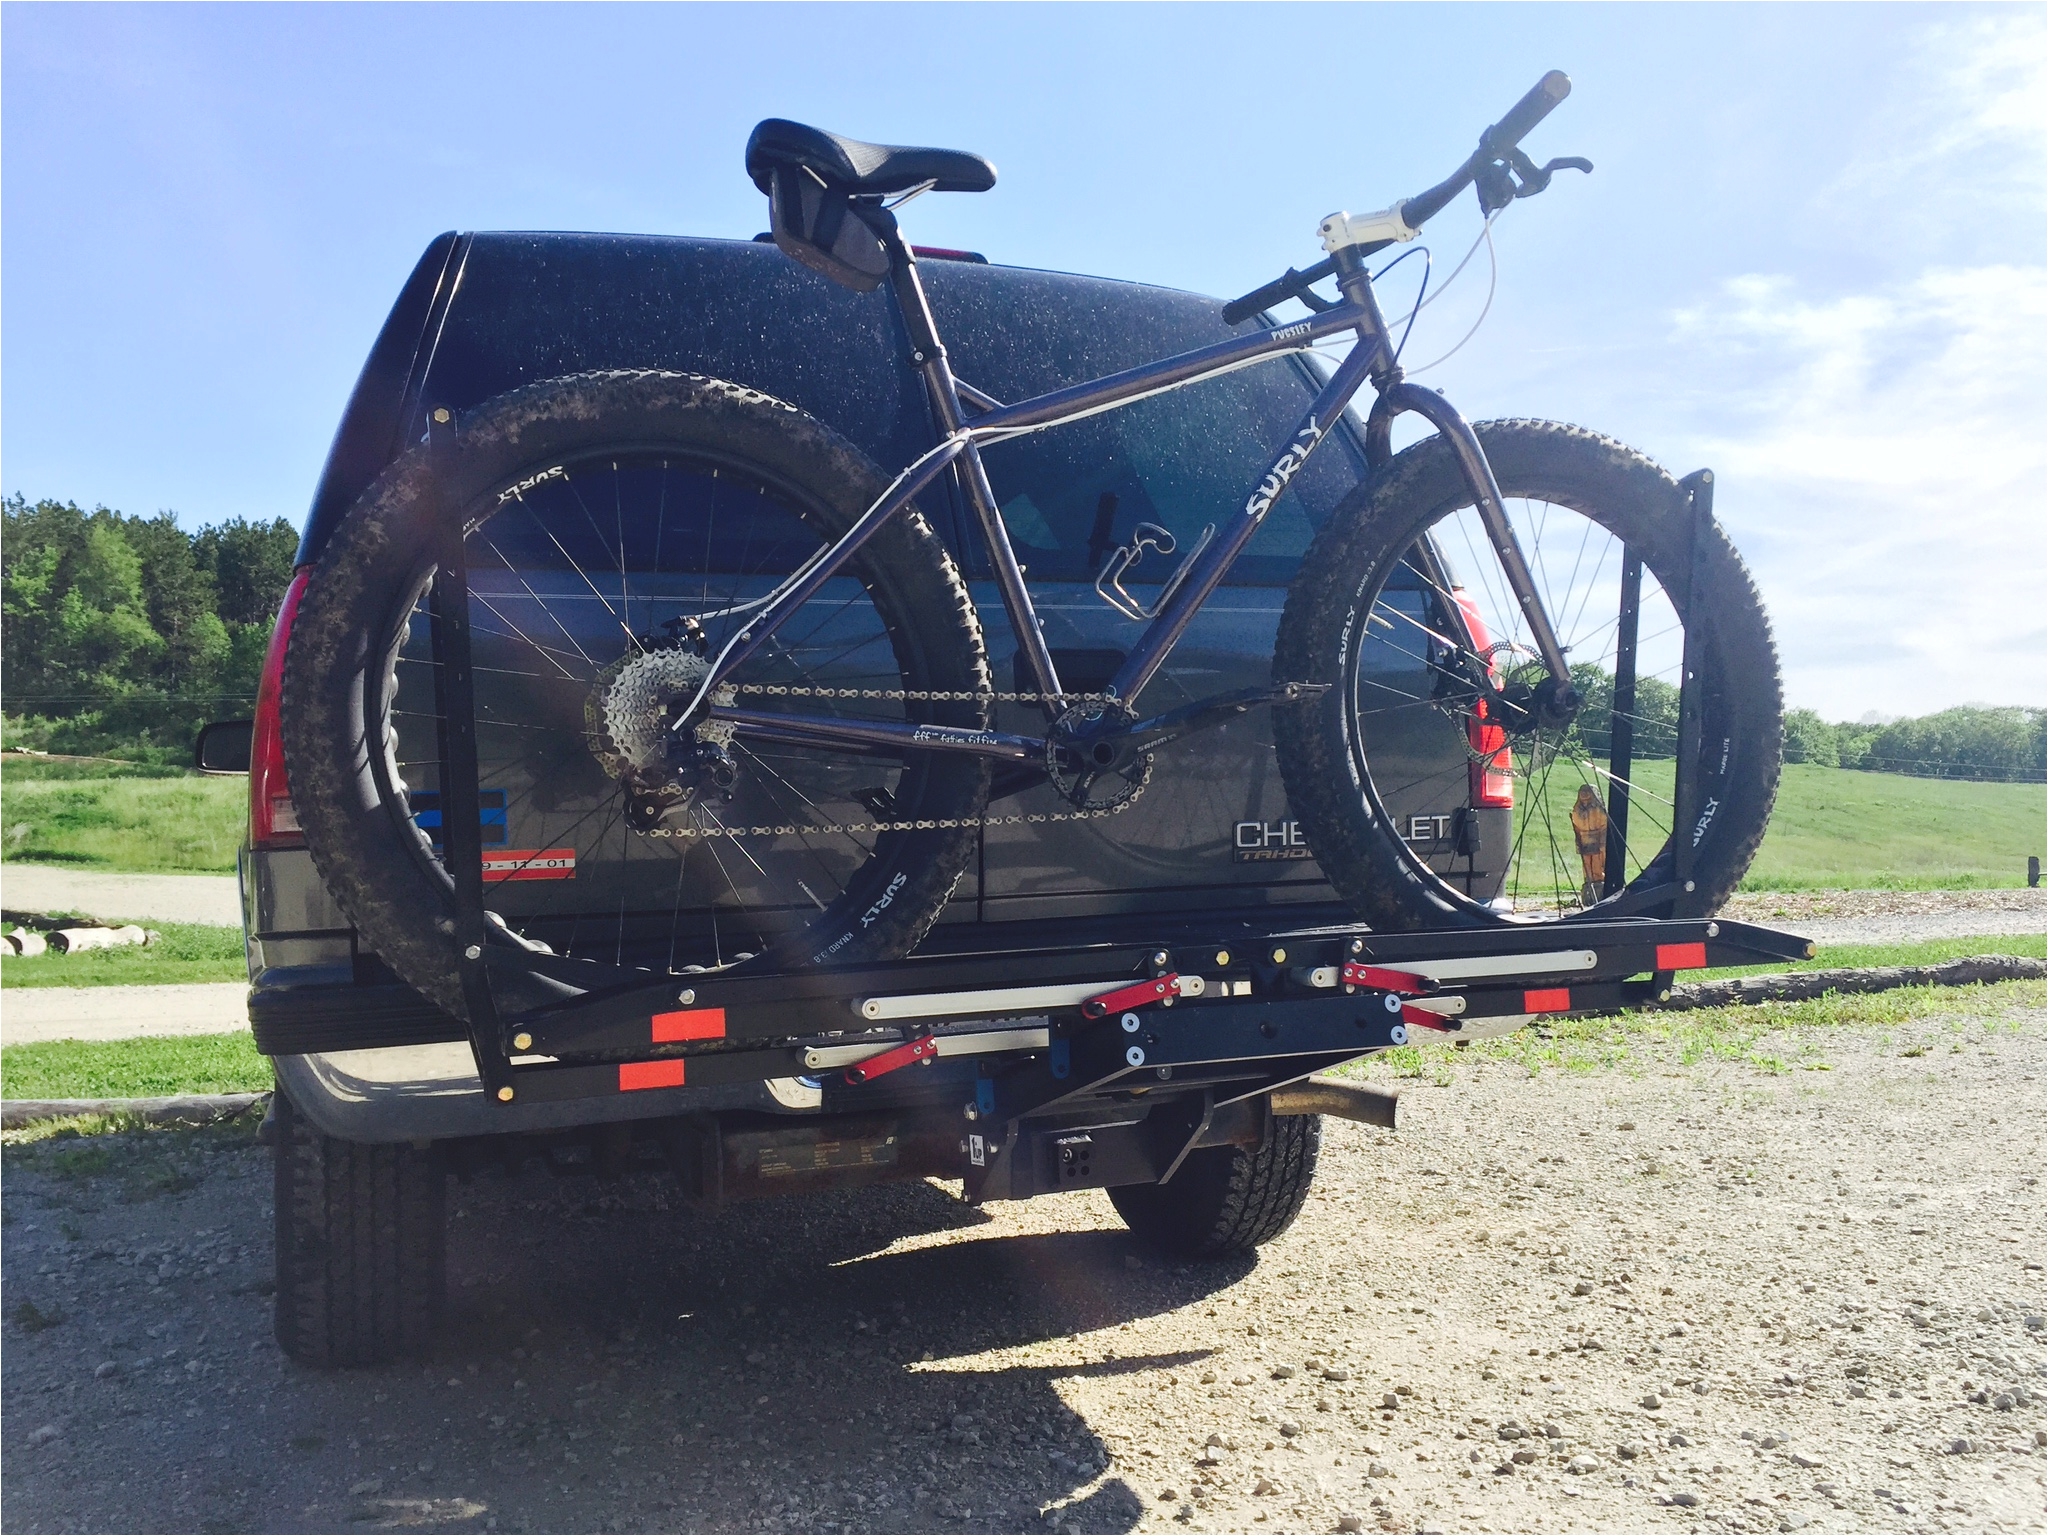 hitch rack shootout 1up usa fat bike com for sale img tire bakers full